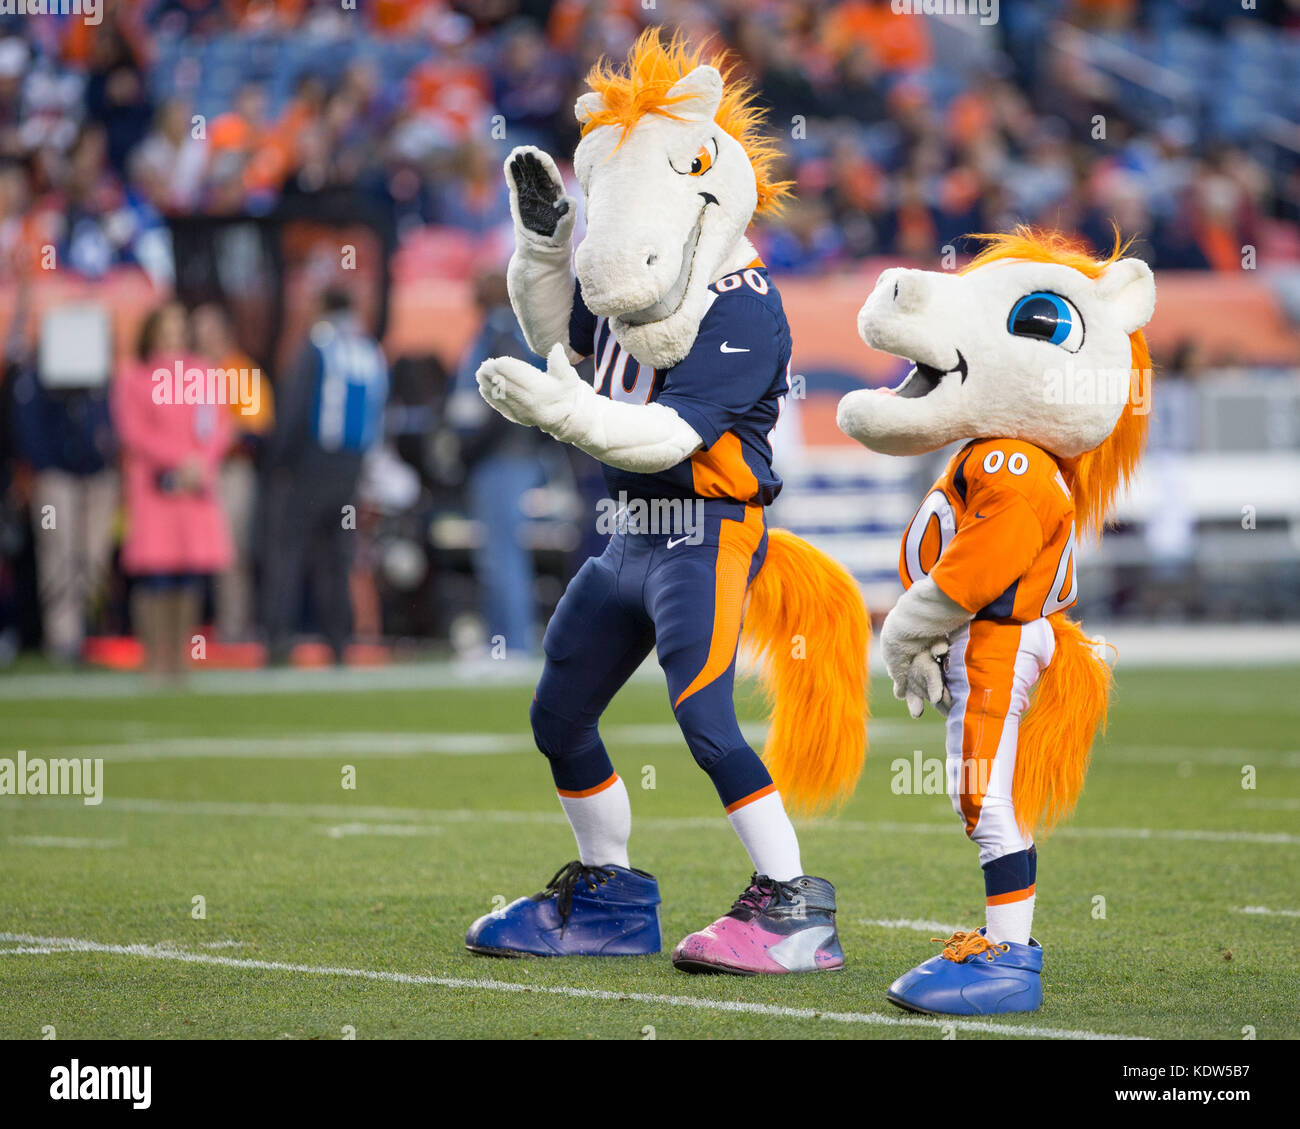 October 15, 2017: Denver Broncos mascot during pre-game warm up of an NFL week 6 matchup between the New York Giants and the Denver Broncos at Sports Authority Field at Mile High Stadium Denver CO, Scott D Stivason/Cal Sport Media Stock Photo